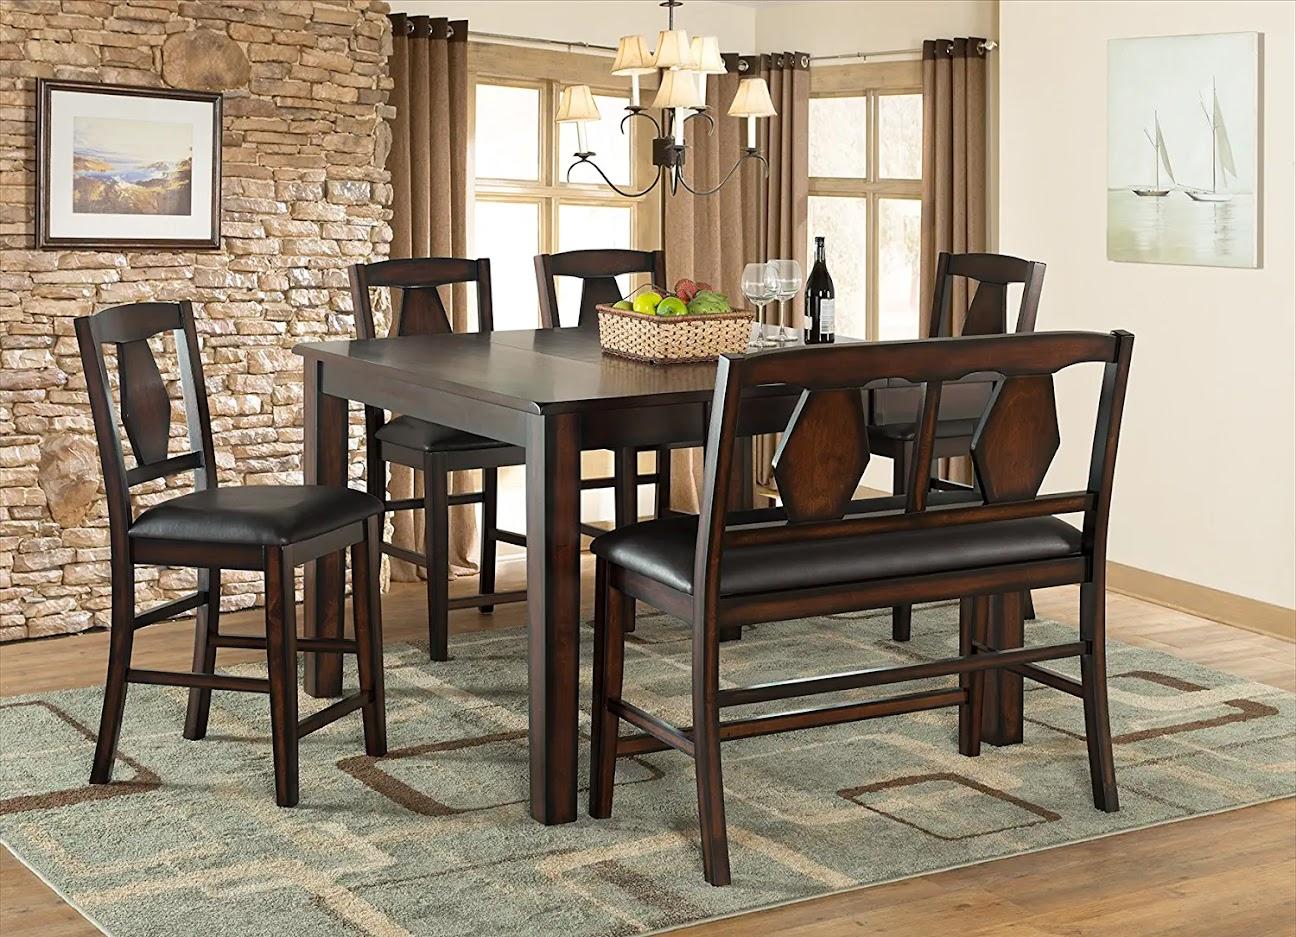 6 Piece Dining Table with Butterfly Leaf, 4 Stools, and a Bench in Brown Finish